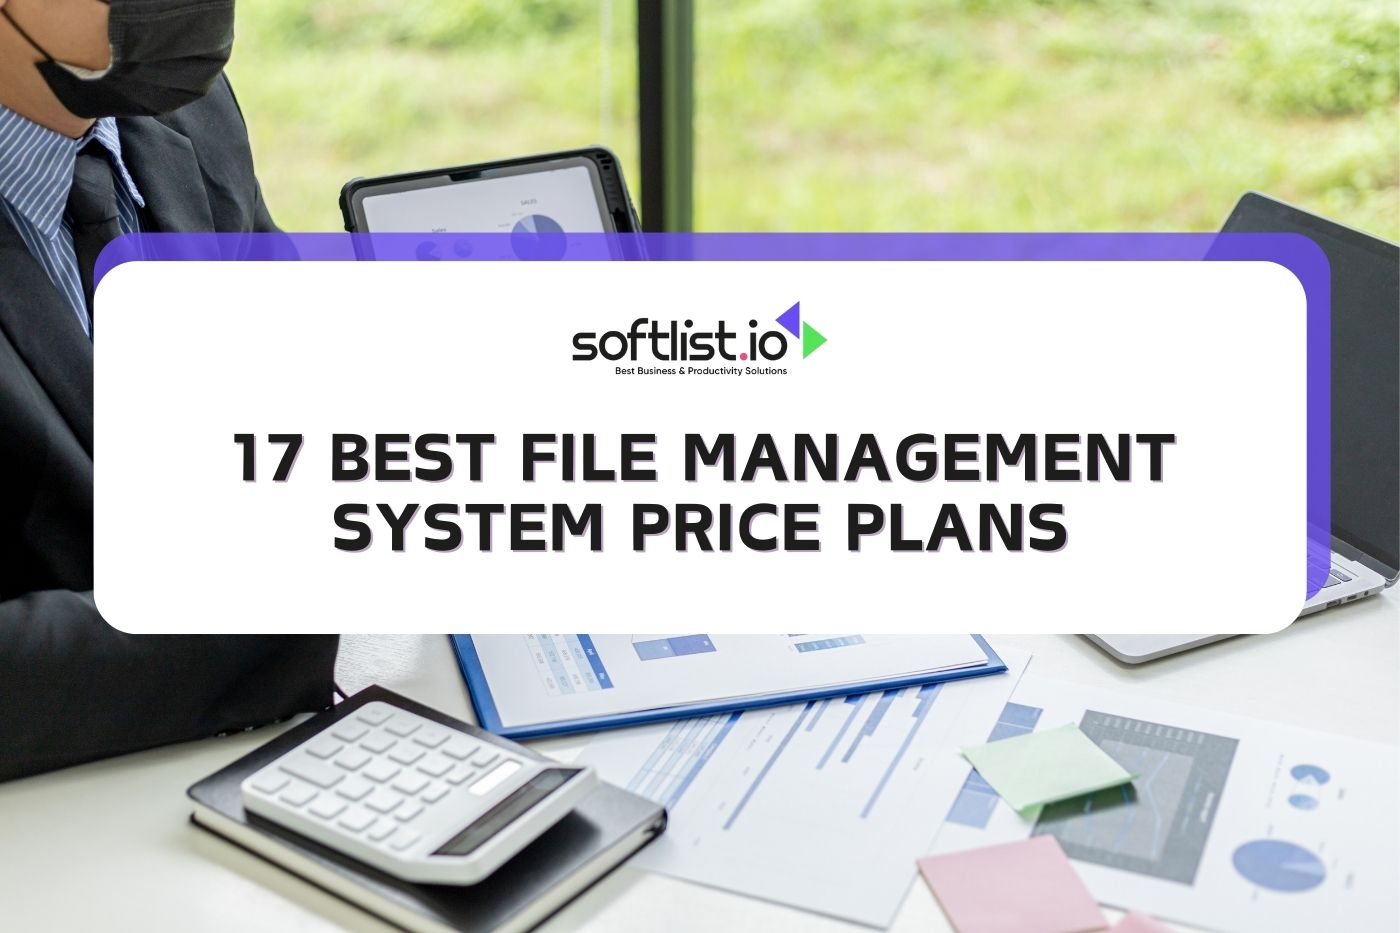 file management systems price plans